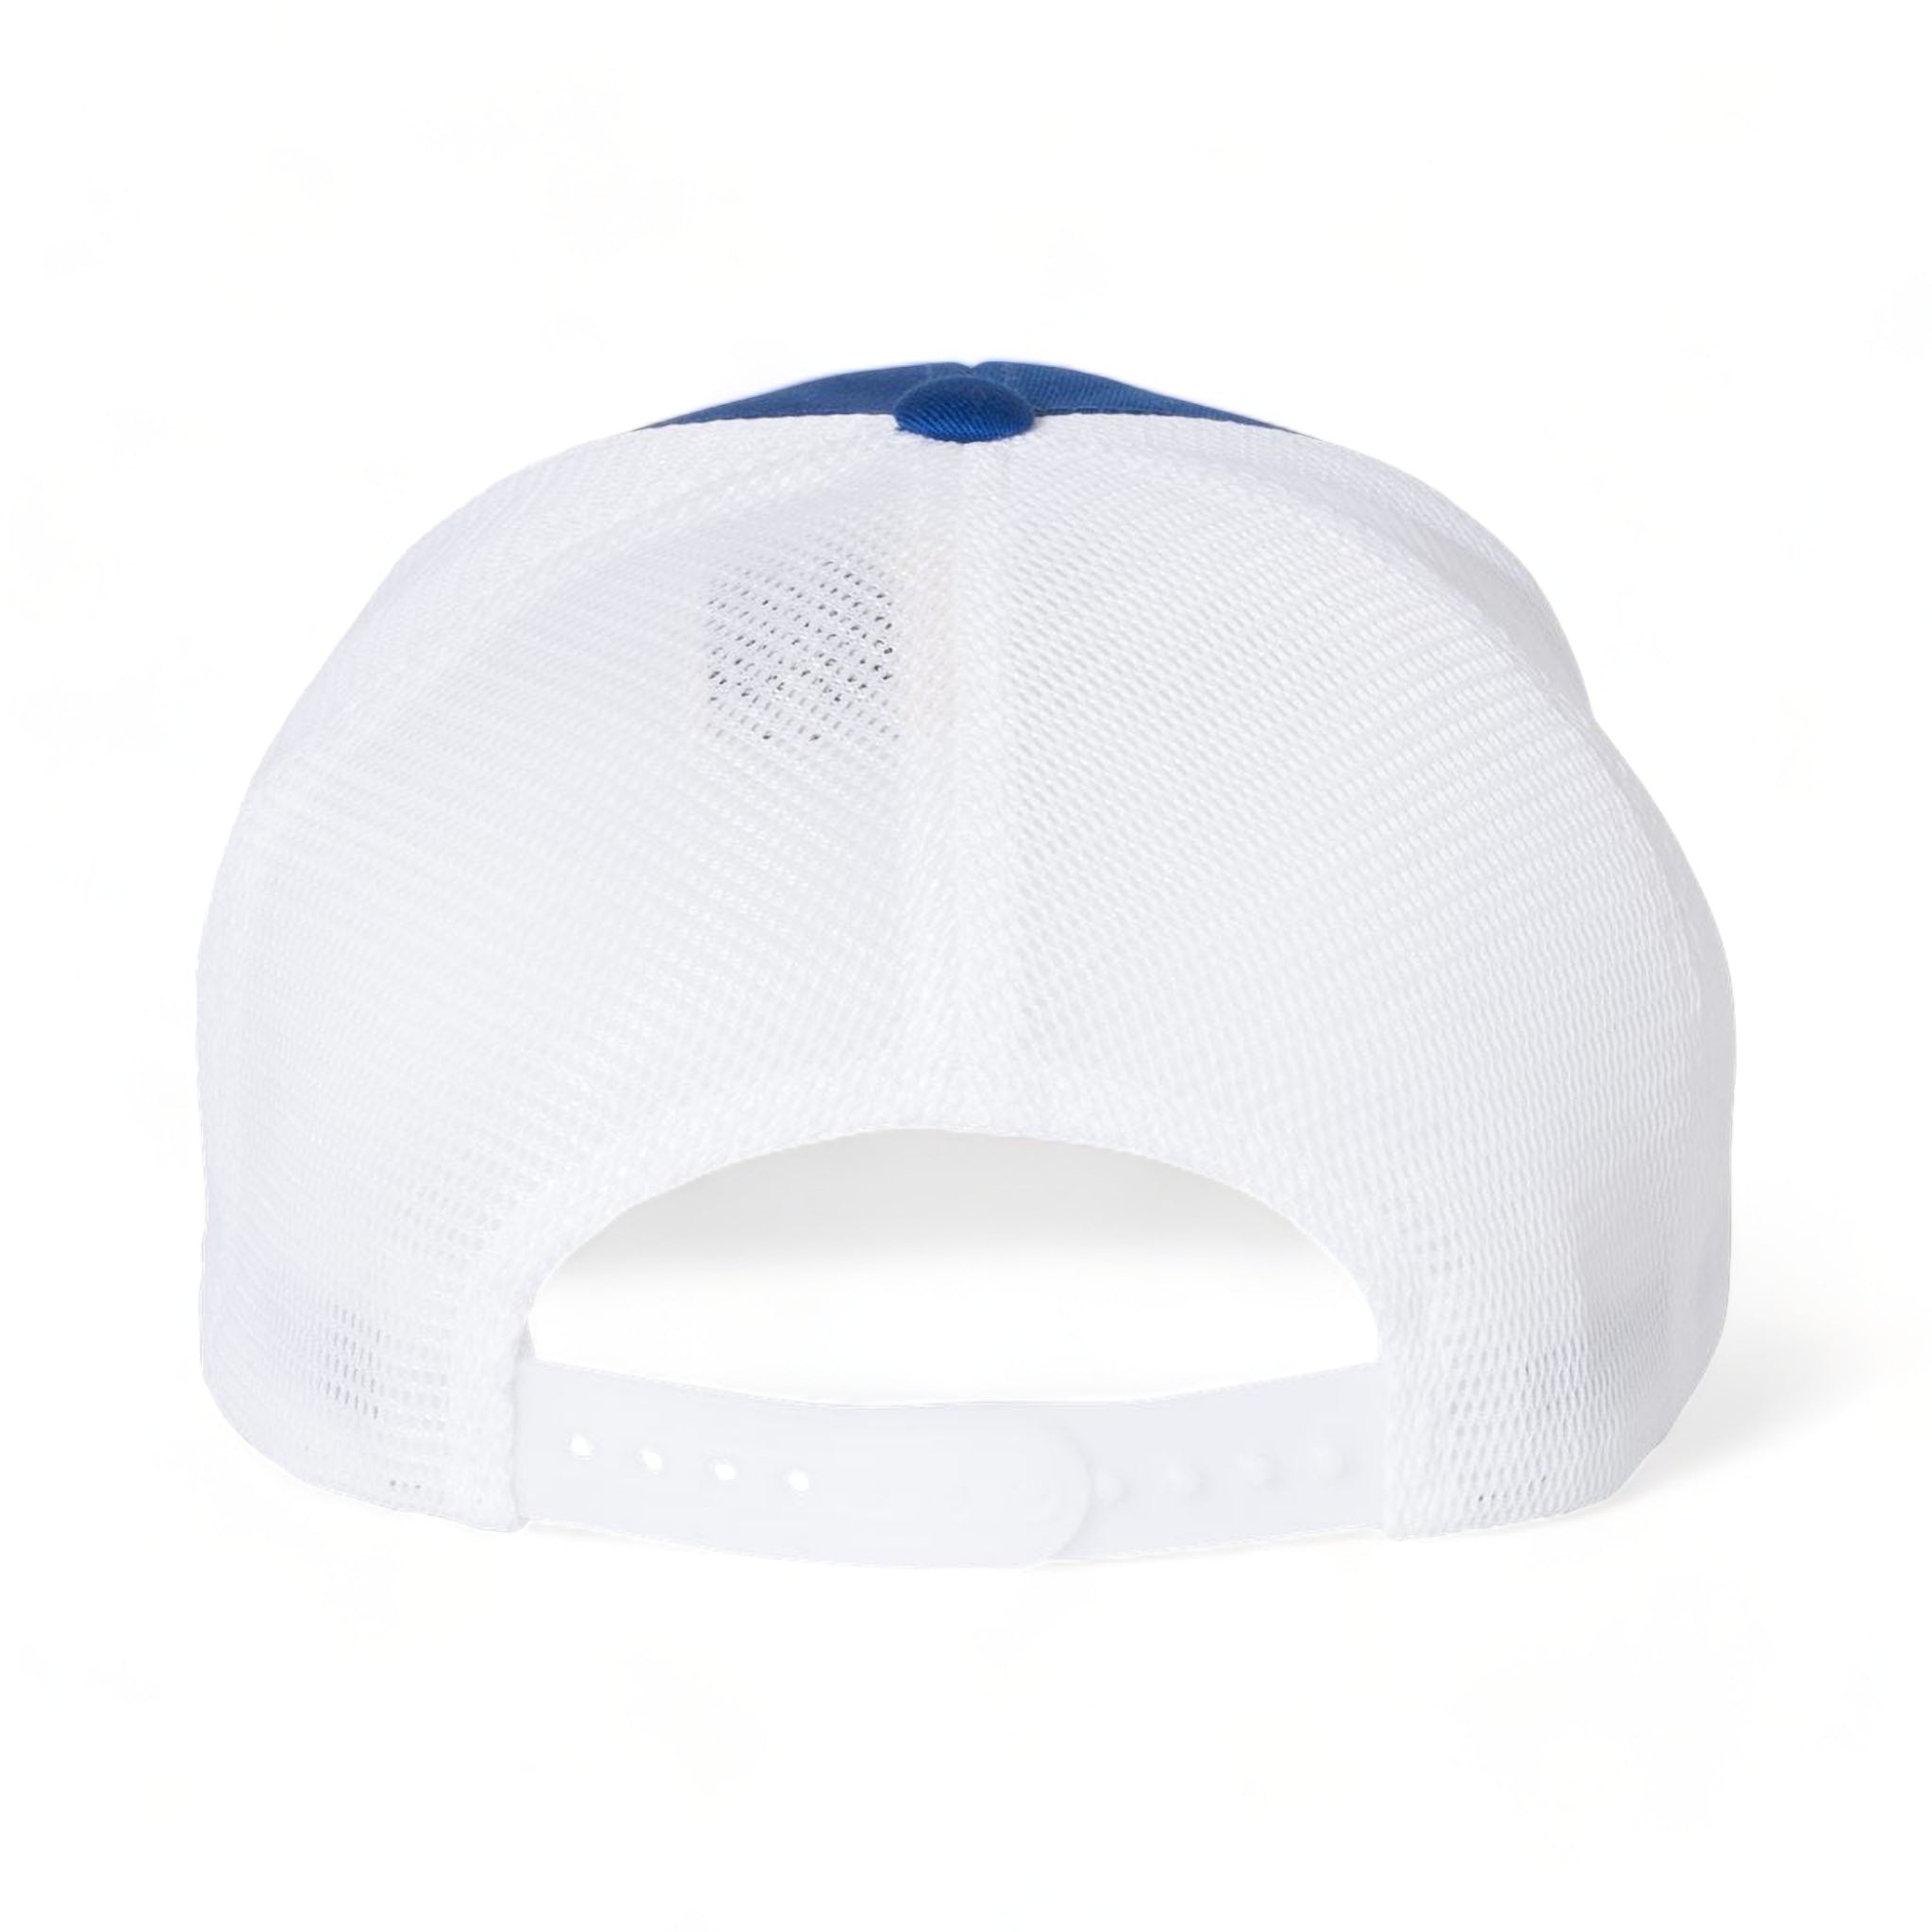 Back view of Flexfit 110M custom hat in royal and white